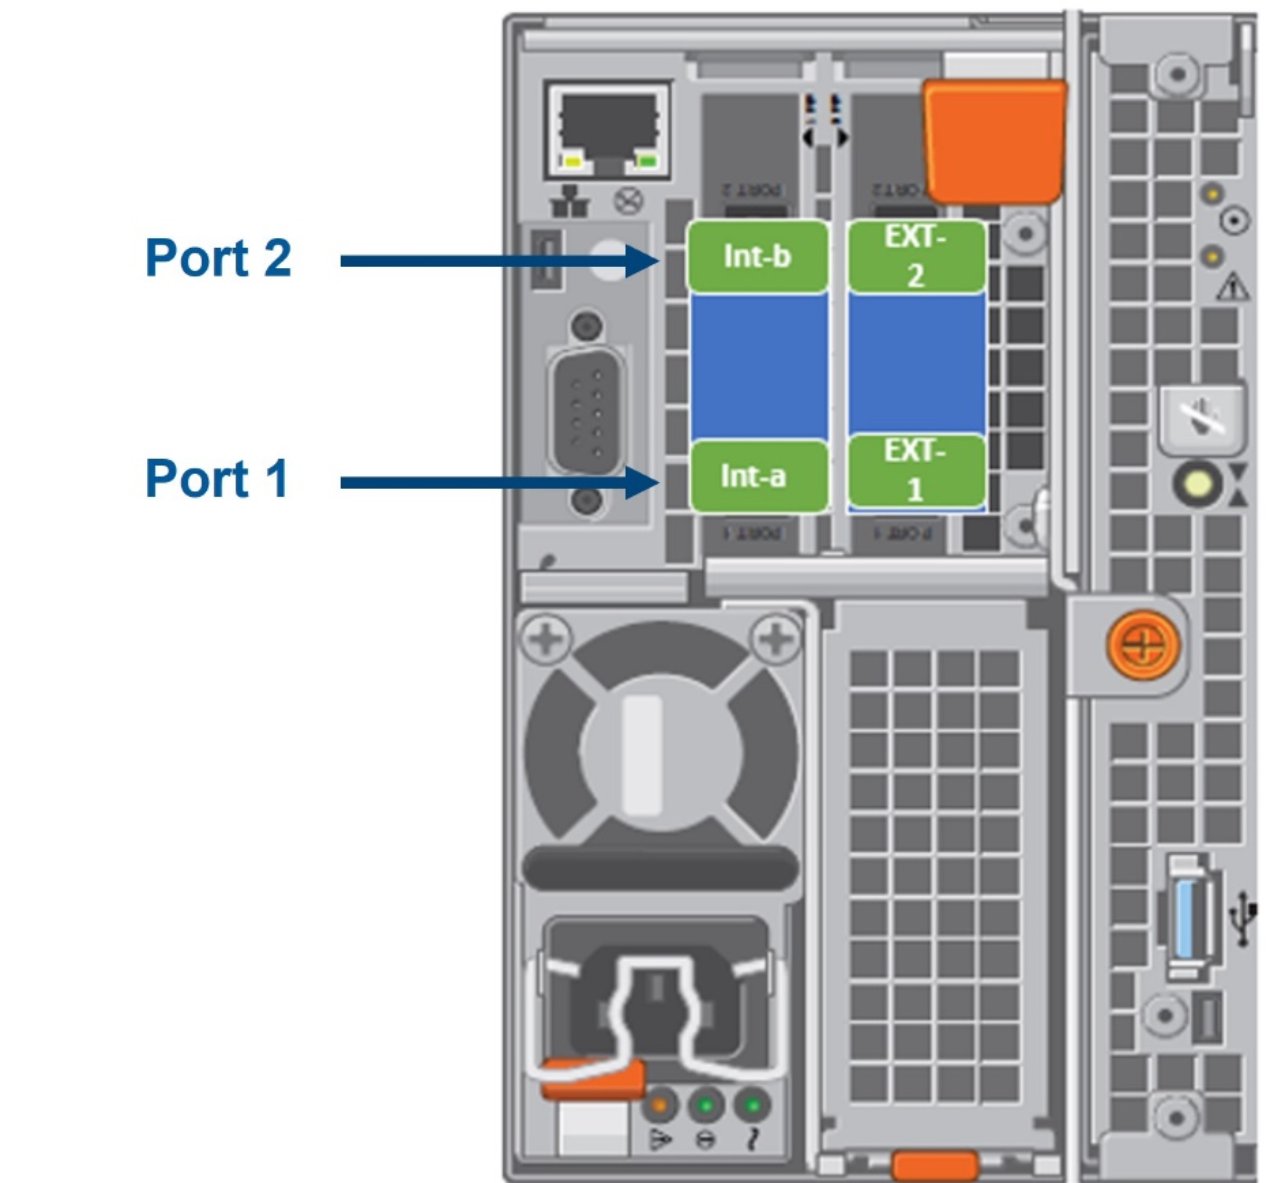 A diagram depicting the rear view highlighting the internal back-end and front-end NIC ports for the F800, F810, H600, H5600, H500, H400, A200, A2000, H700, H7000, A300, and A3000 node.